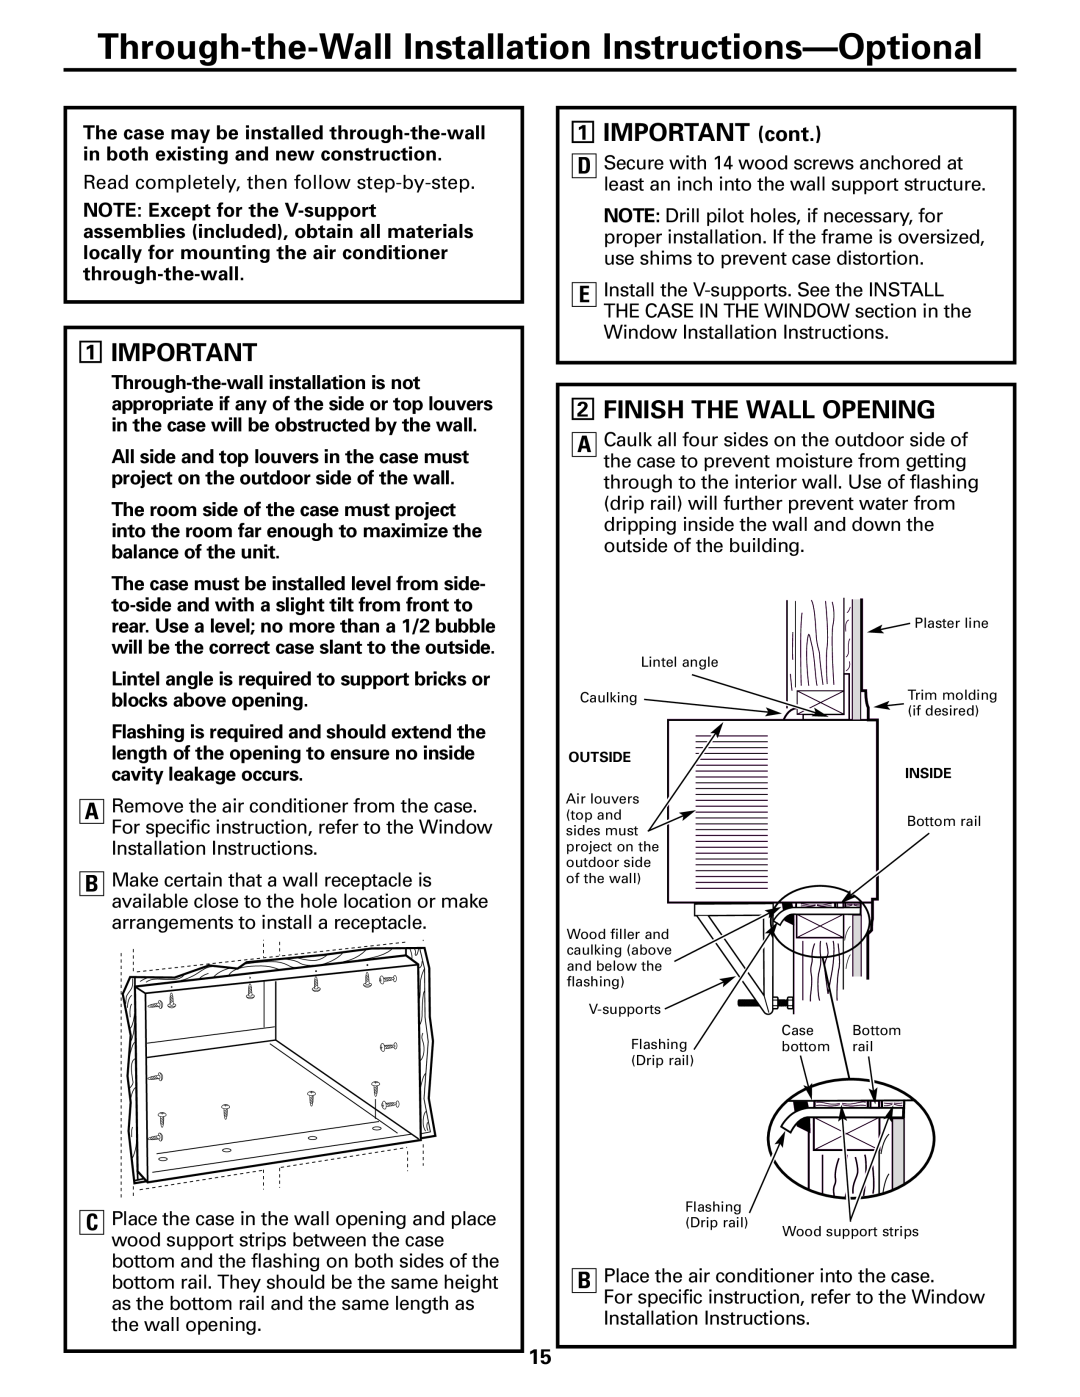 GE AEH24, AEV24, AEQ24, AEW24 Through-the-Wall Installation Instructions-Optional, IMPORTANT cont, Finish The Wall Opening 